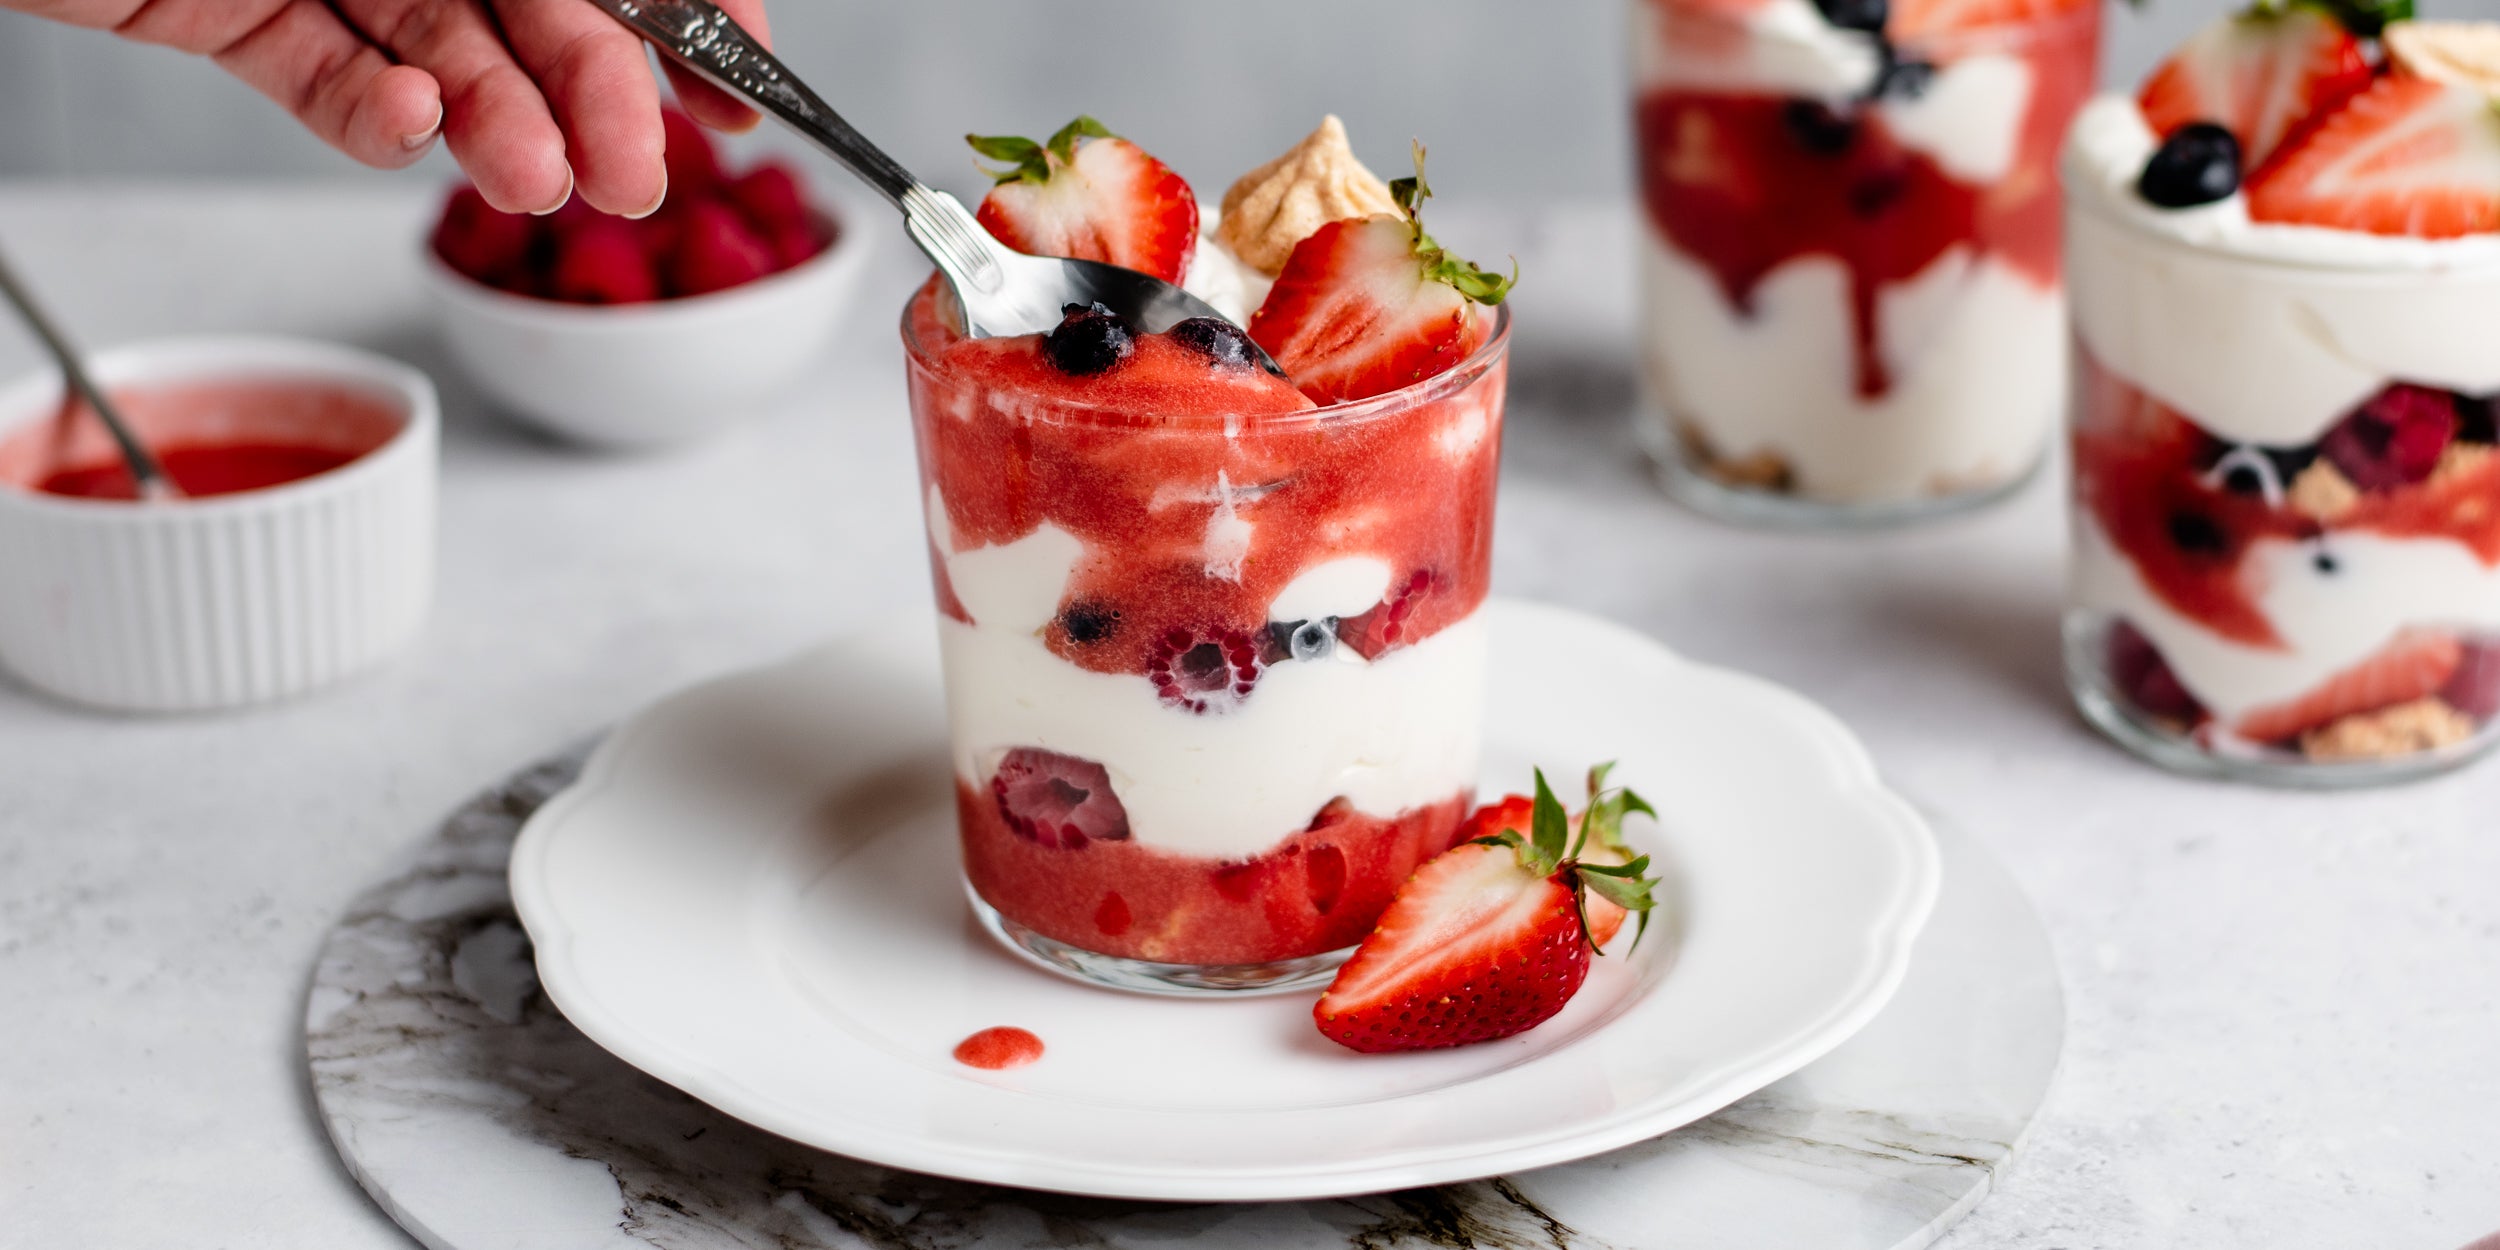 Summer Berry Eton Mess being spooned with strawberry puree and topped with strawberries